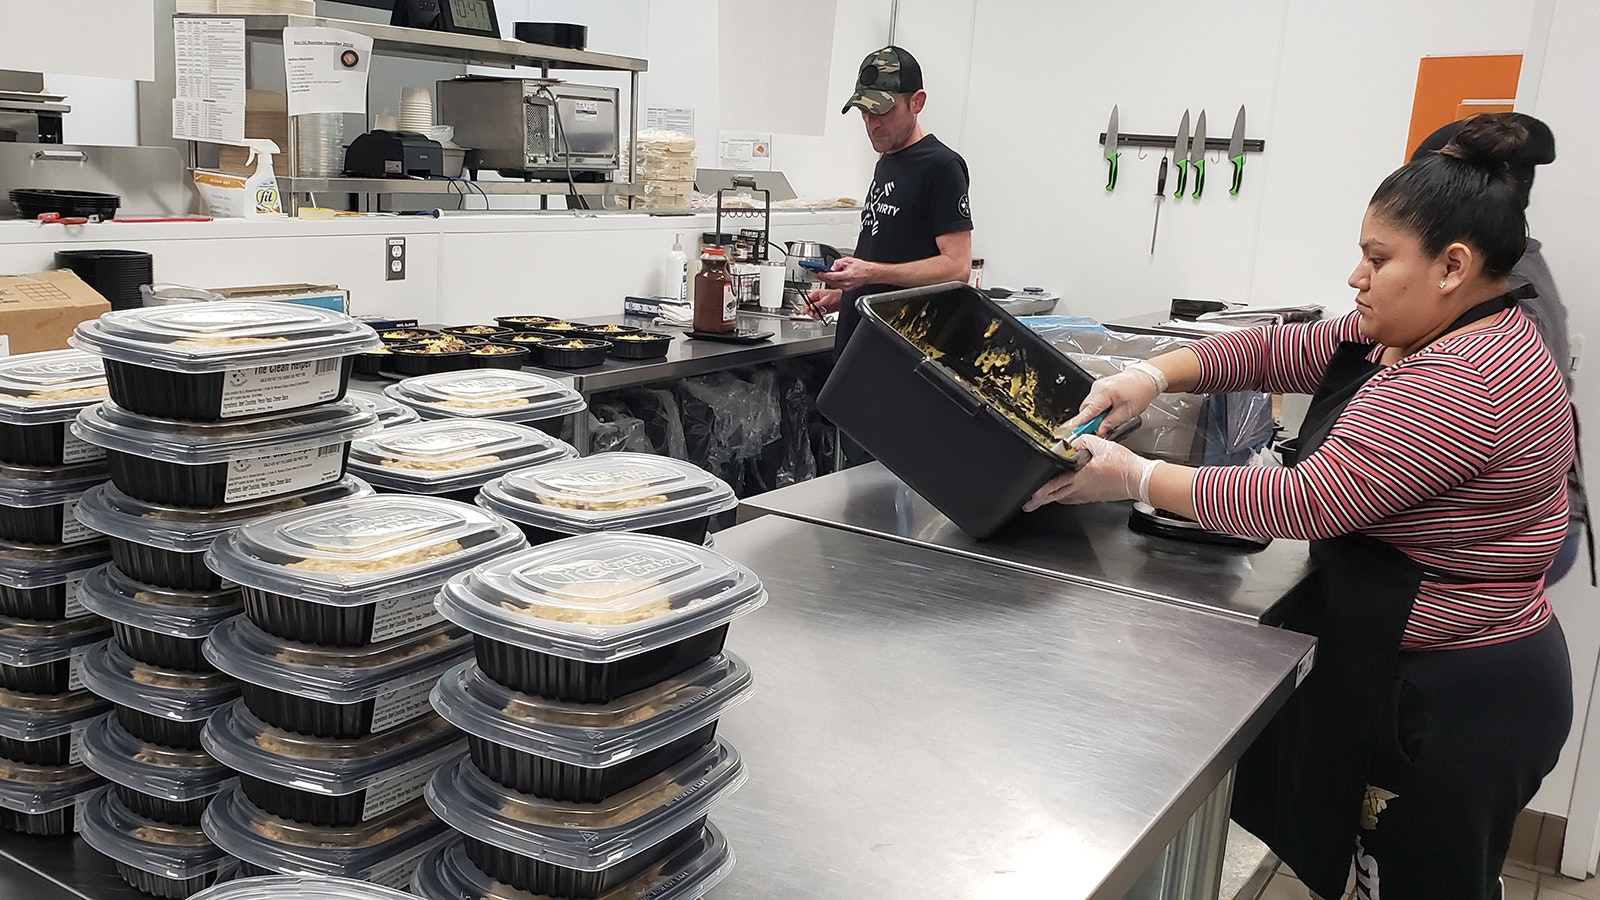 Grab-and-go meals are prepared for pickup Sunday, Monday or Tuesday.